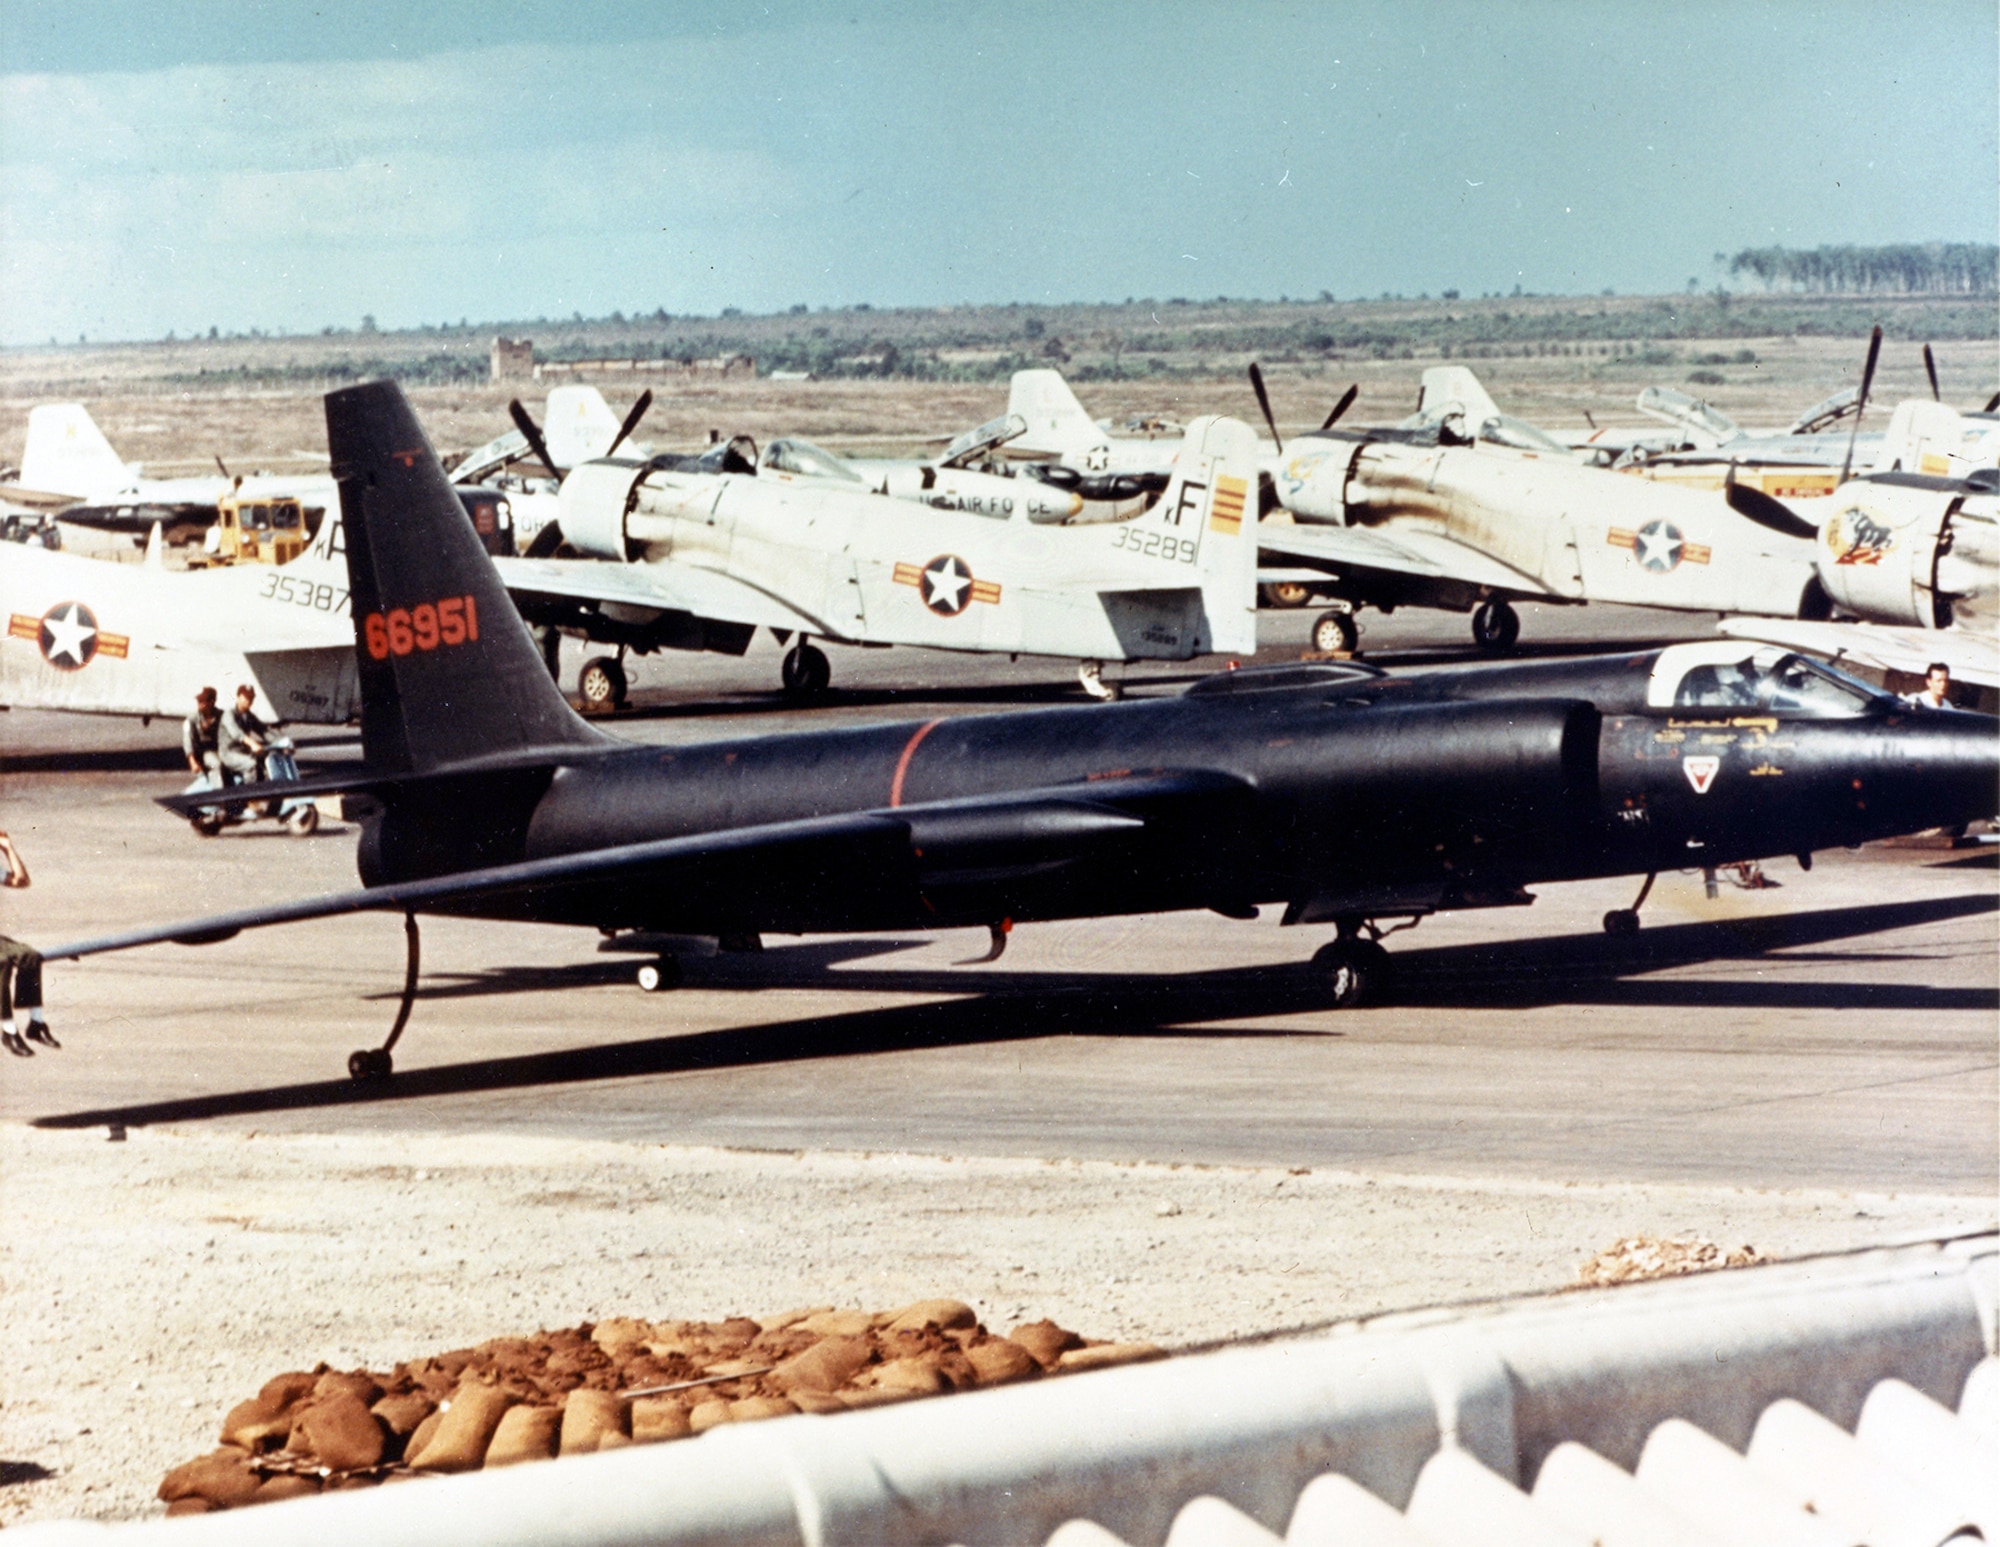 U-2 taxiing at Bien Hoa Air Base, South Vietnam, in early 1965. For security reasons, U-2s were rarely seen outside of their hangars. (U.S. Air Force photo)